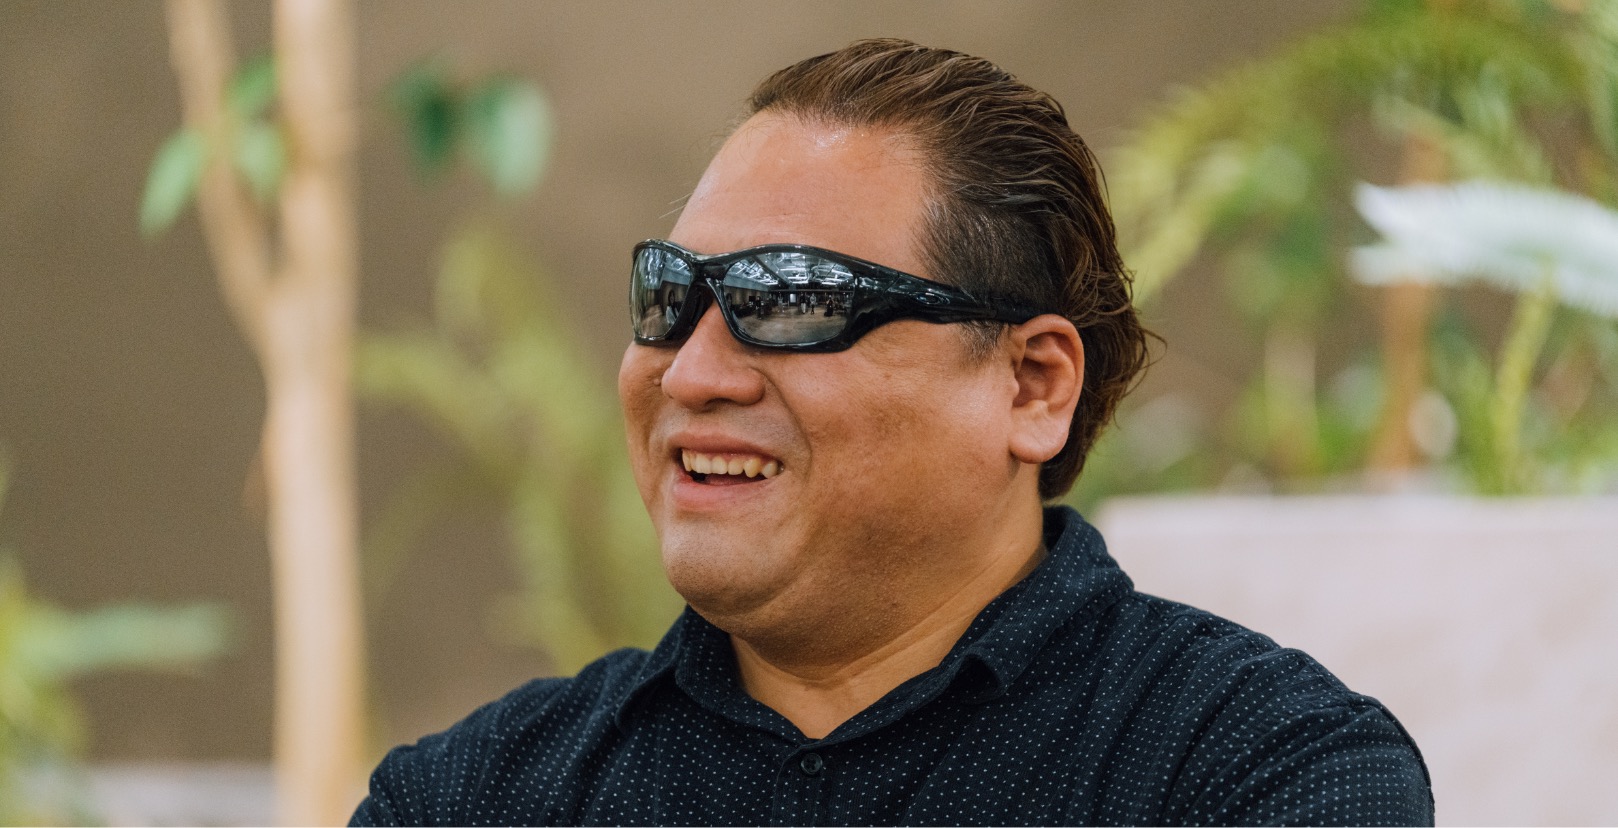 A male with sunglasses talking and smiling